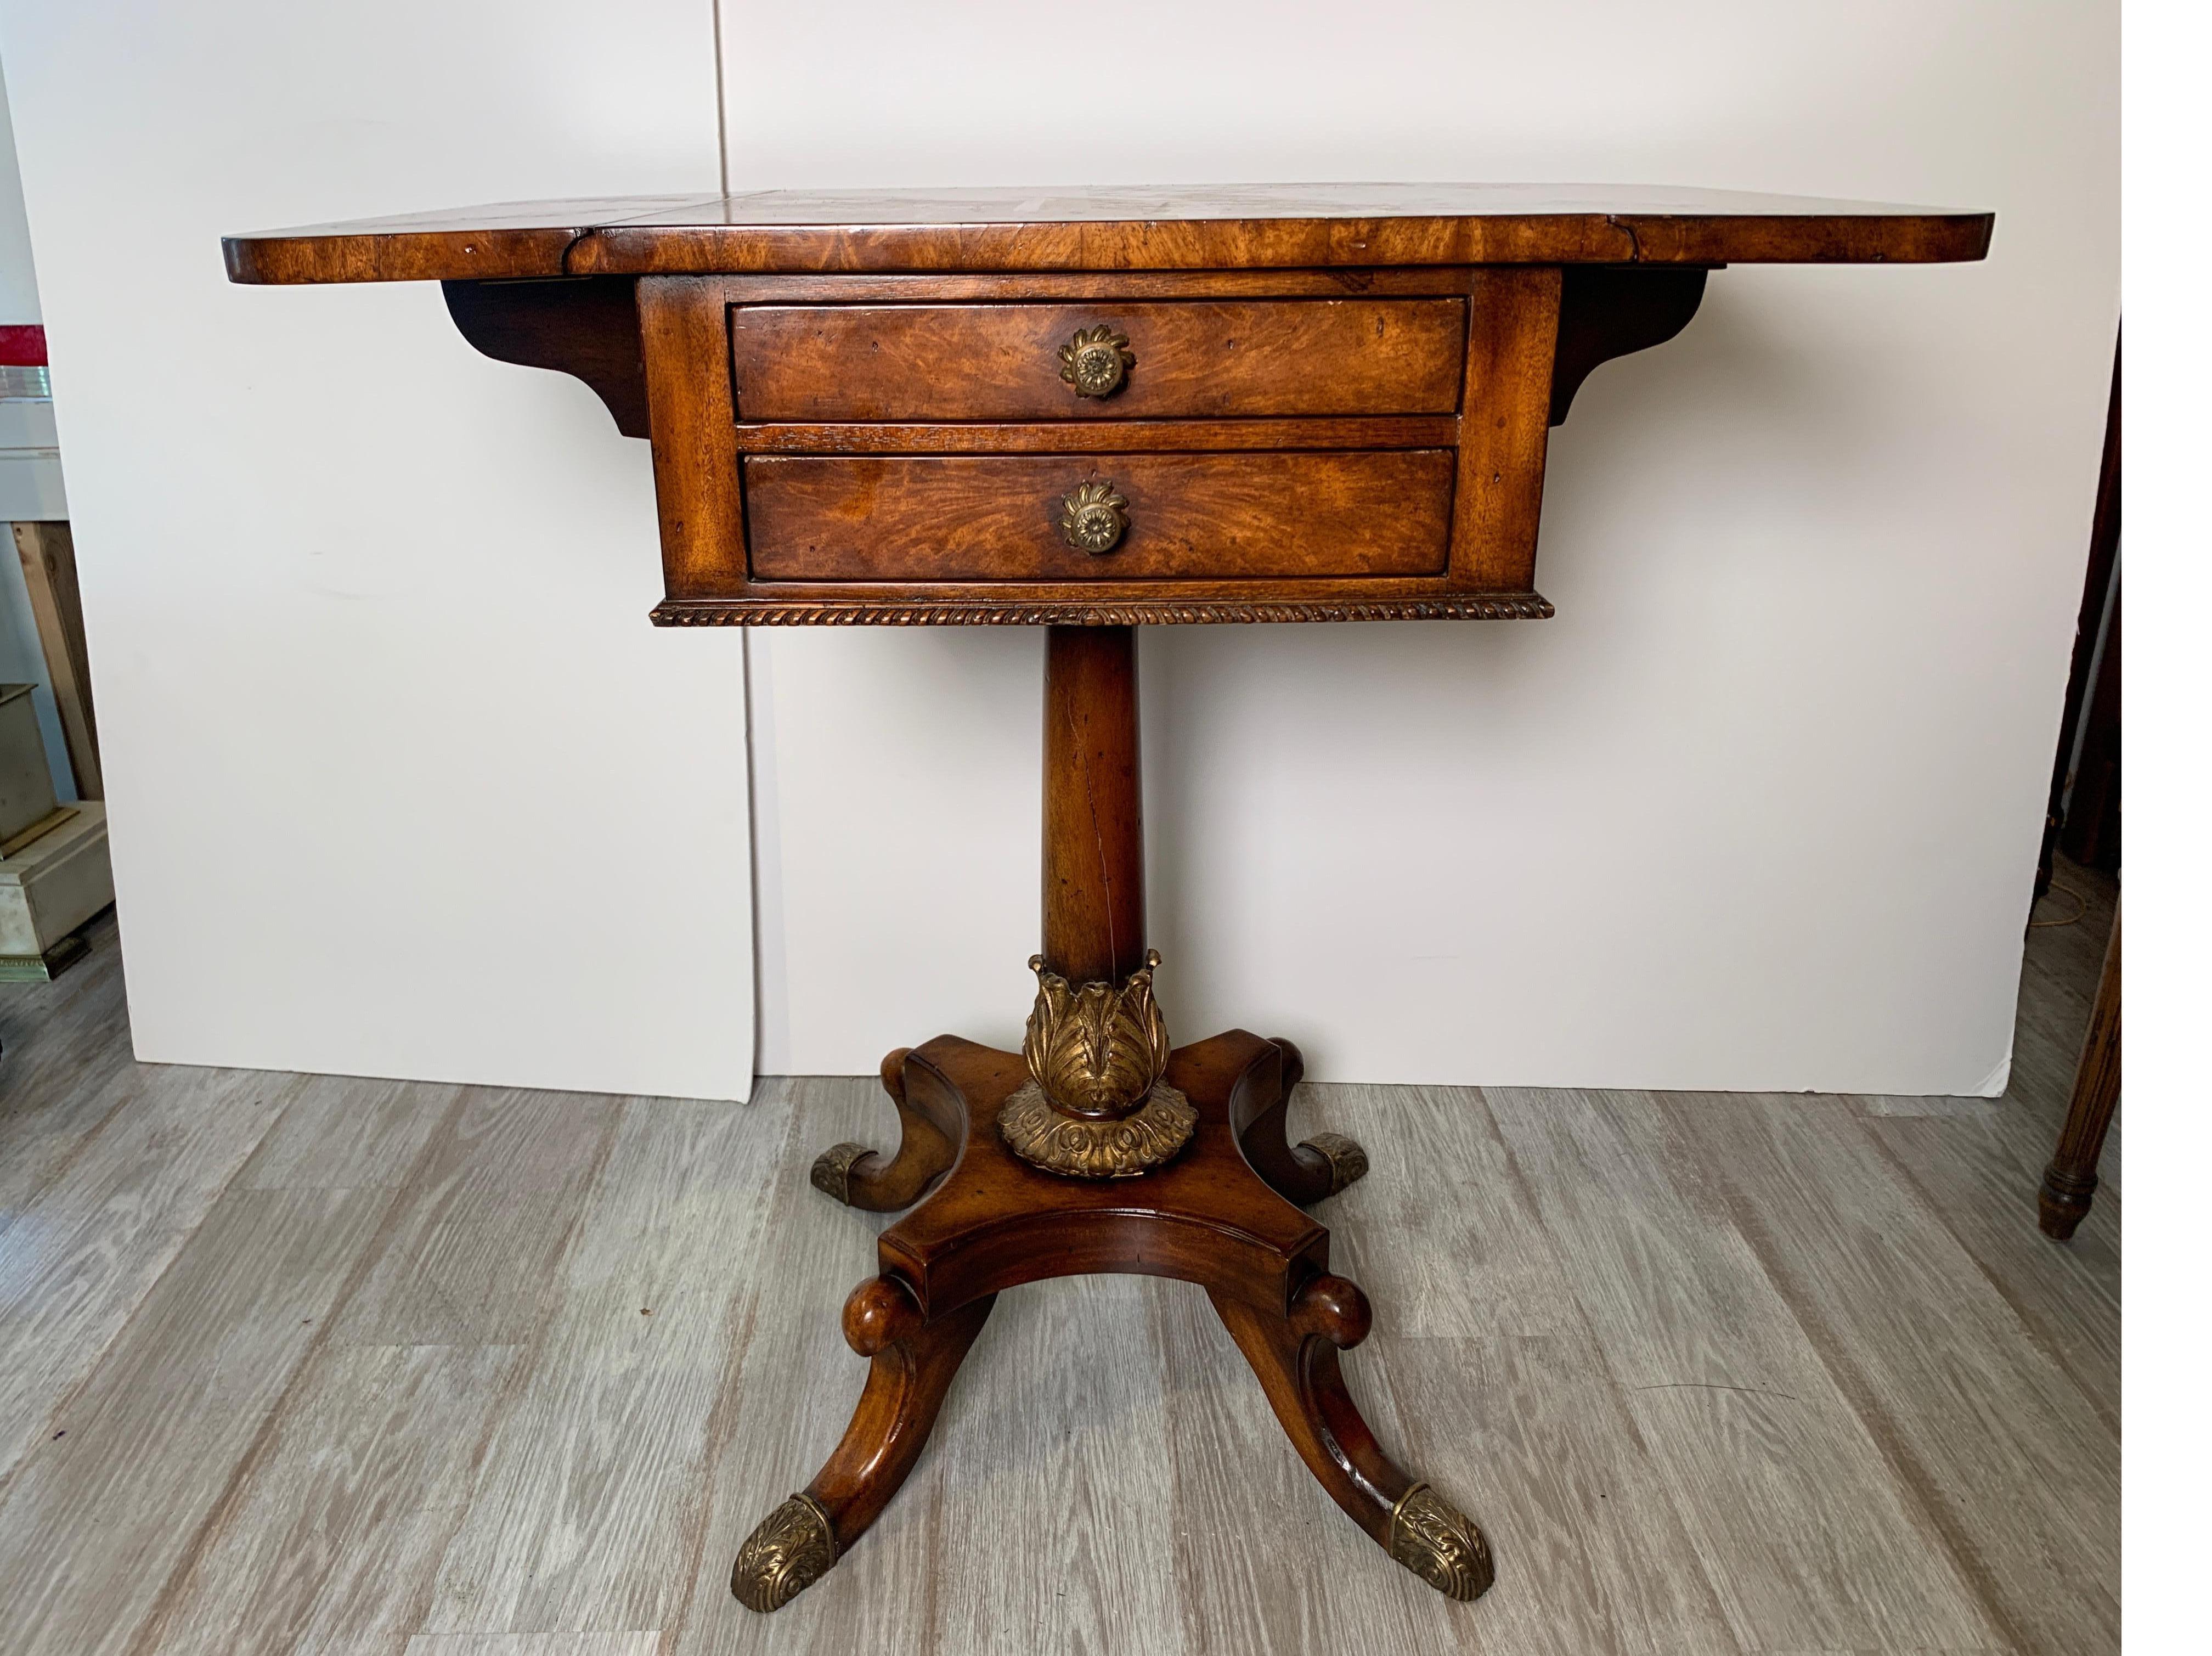 Handsome rich parcel gilt mahogany drop-leaf table with drawers by Theodore Alexander. The top with drop leaves supported by a pedestal column resting on a footed pedestal base.